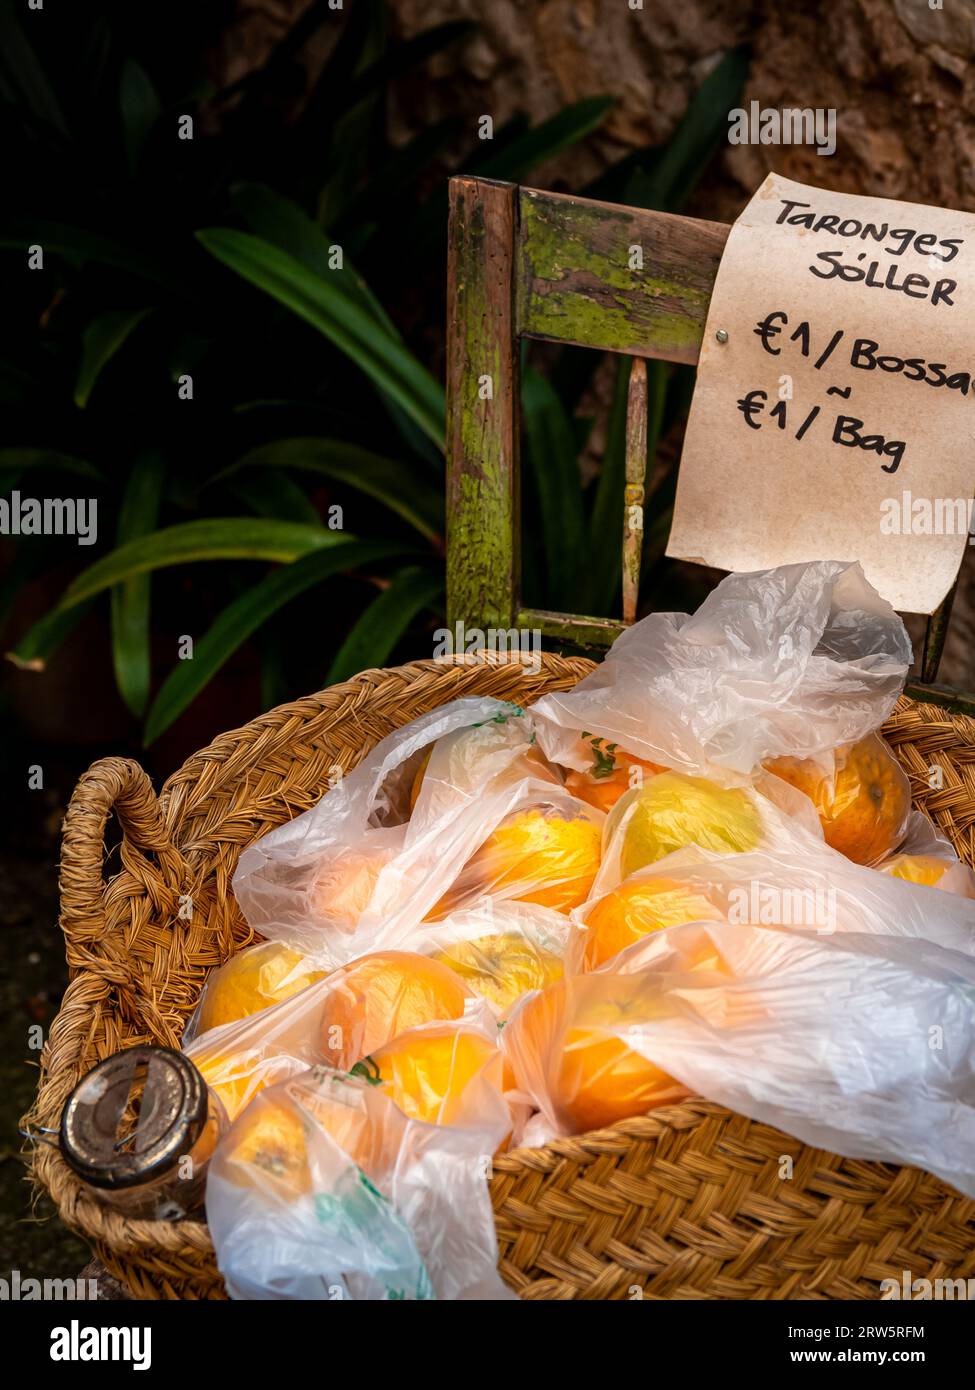 Street vending scene in catalan language as fresh Oranges from Sóller are showcased in a woven basket on a chair with a coin jar, each portion packed Stock Photo